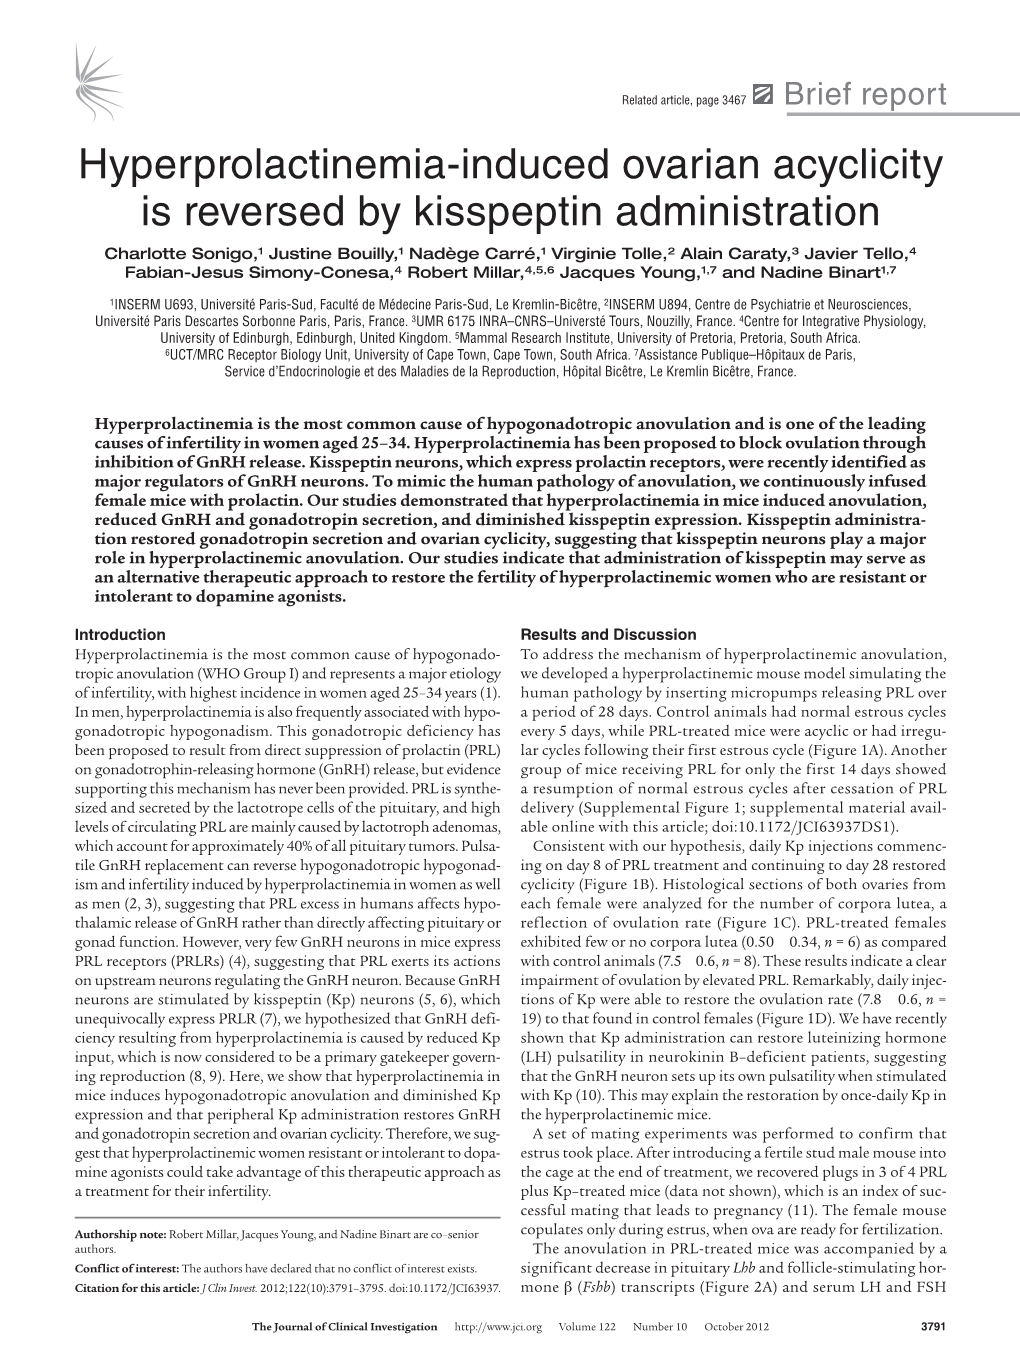 Hyperprolactinemia-Induced Ovarian Acyclicity Is Reversed by Kisspeptin